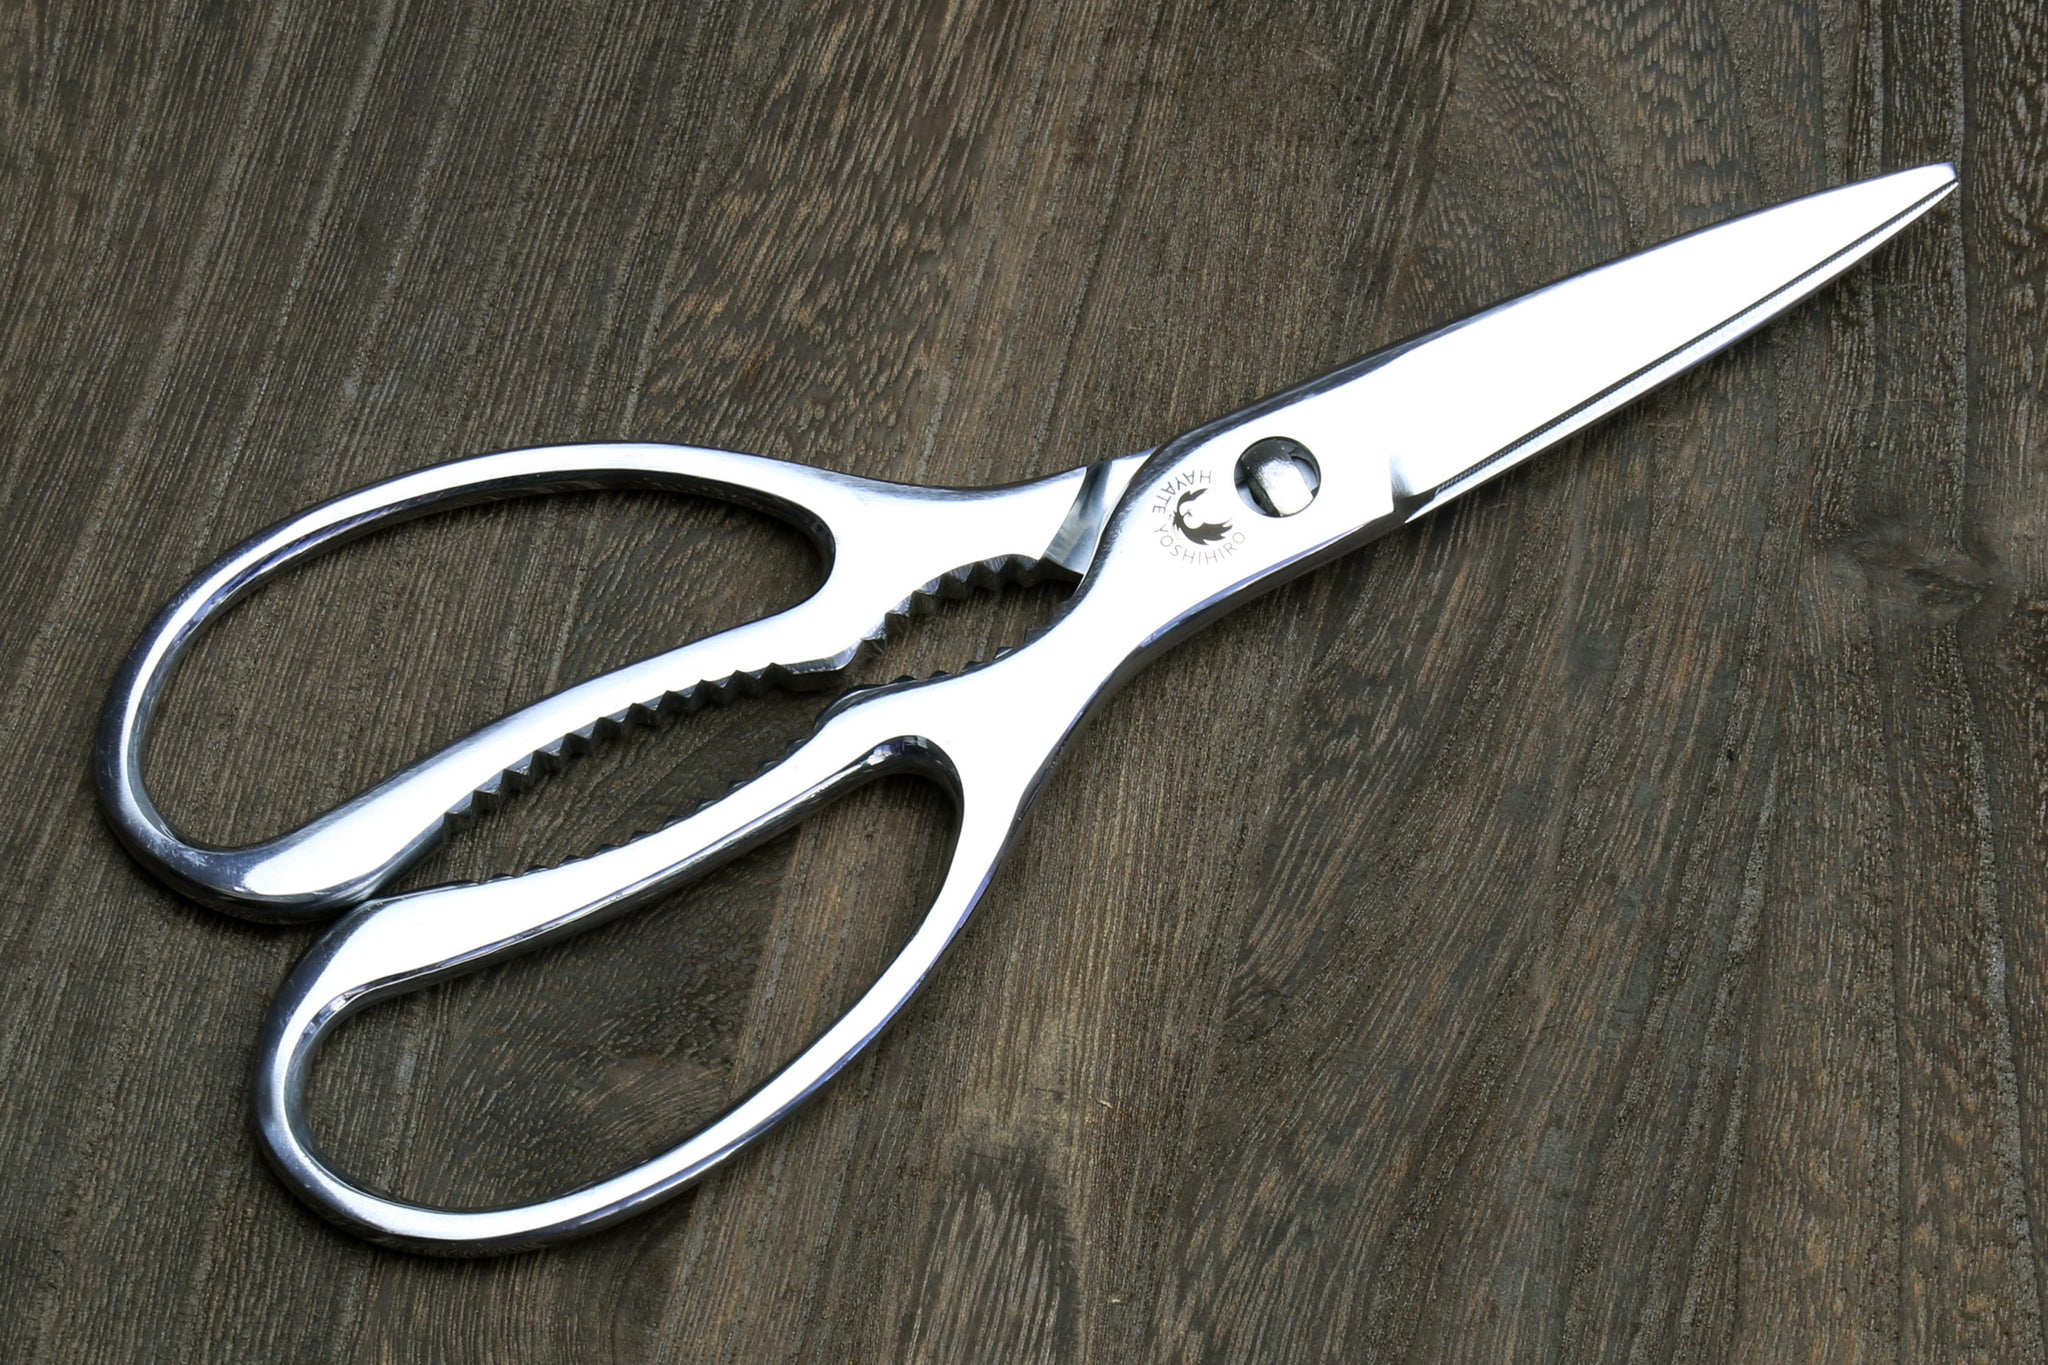 VERSAINSECT e in Japan] Kitchen Scissors All Purpose, Effortless Cutting,  Quality Japanese Ergonomic